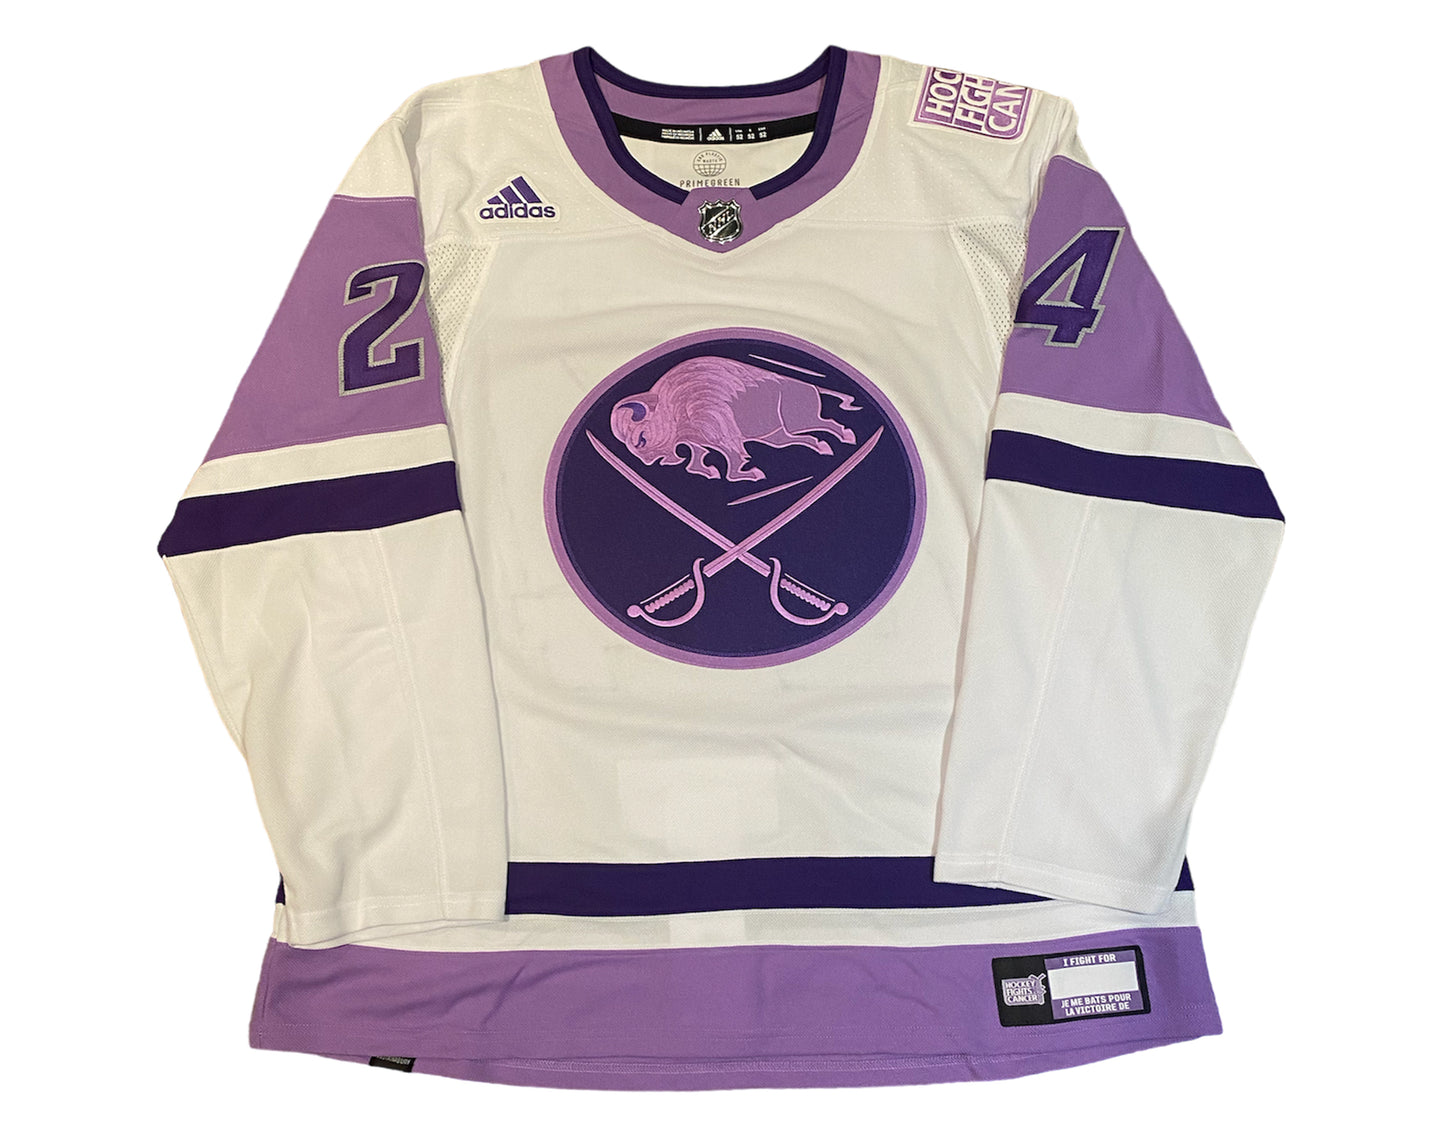 Dylan Cozens Autographed Buffalo Sabres HFC Adidas Jersey Inscribed "Hockey Fights Cancer"